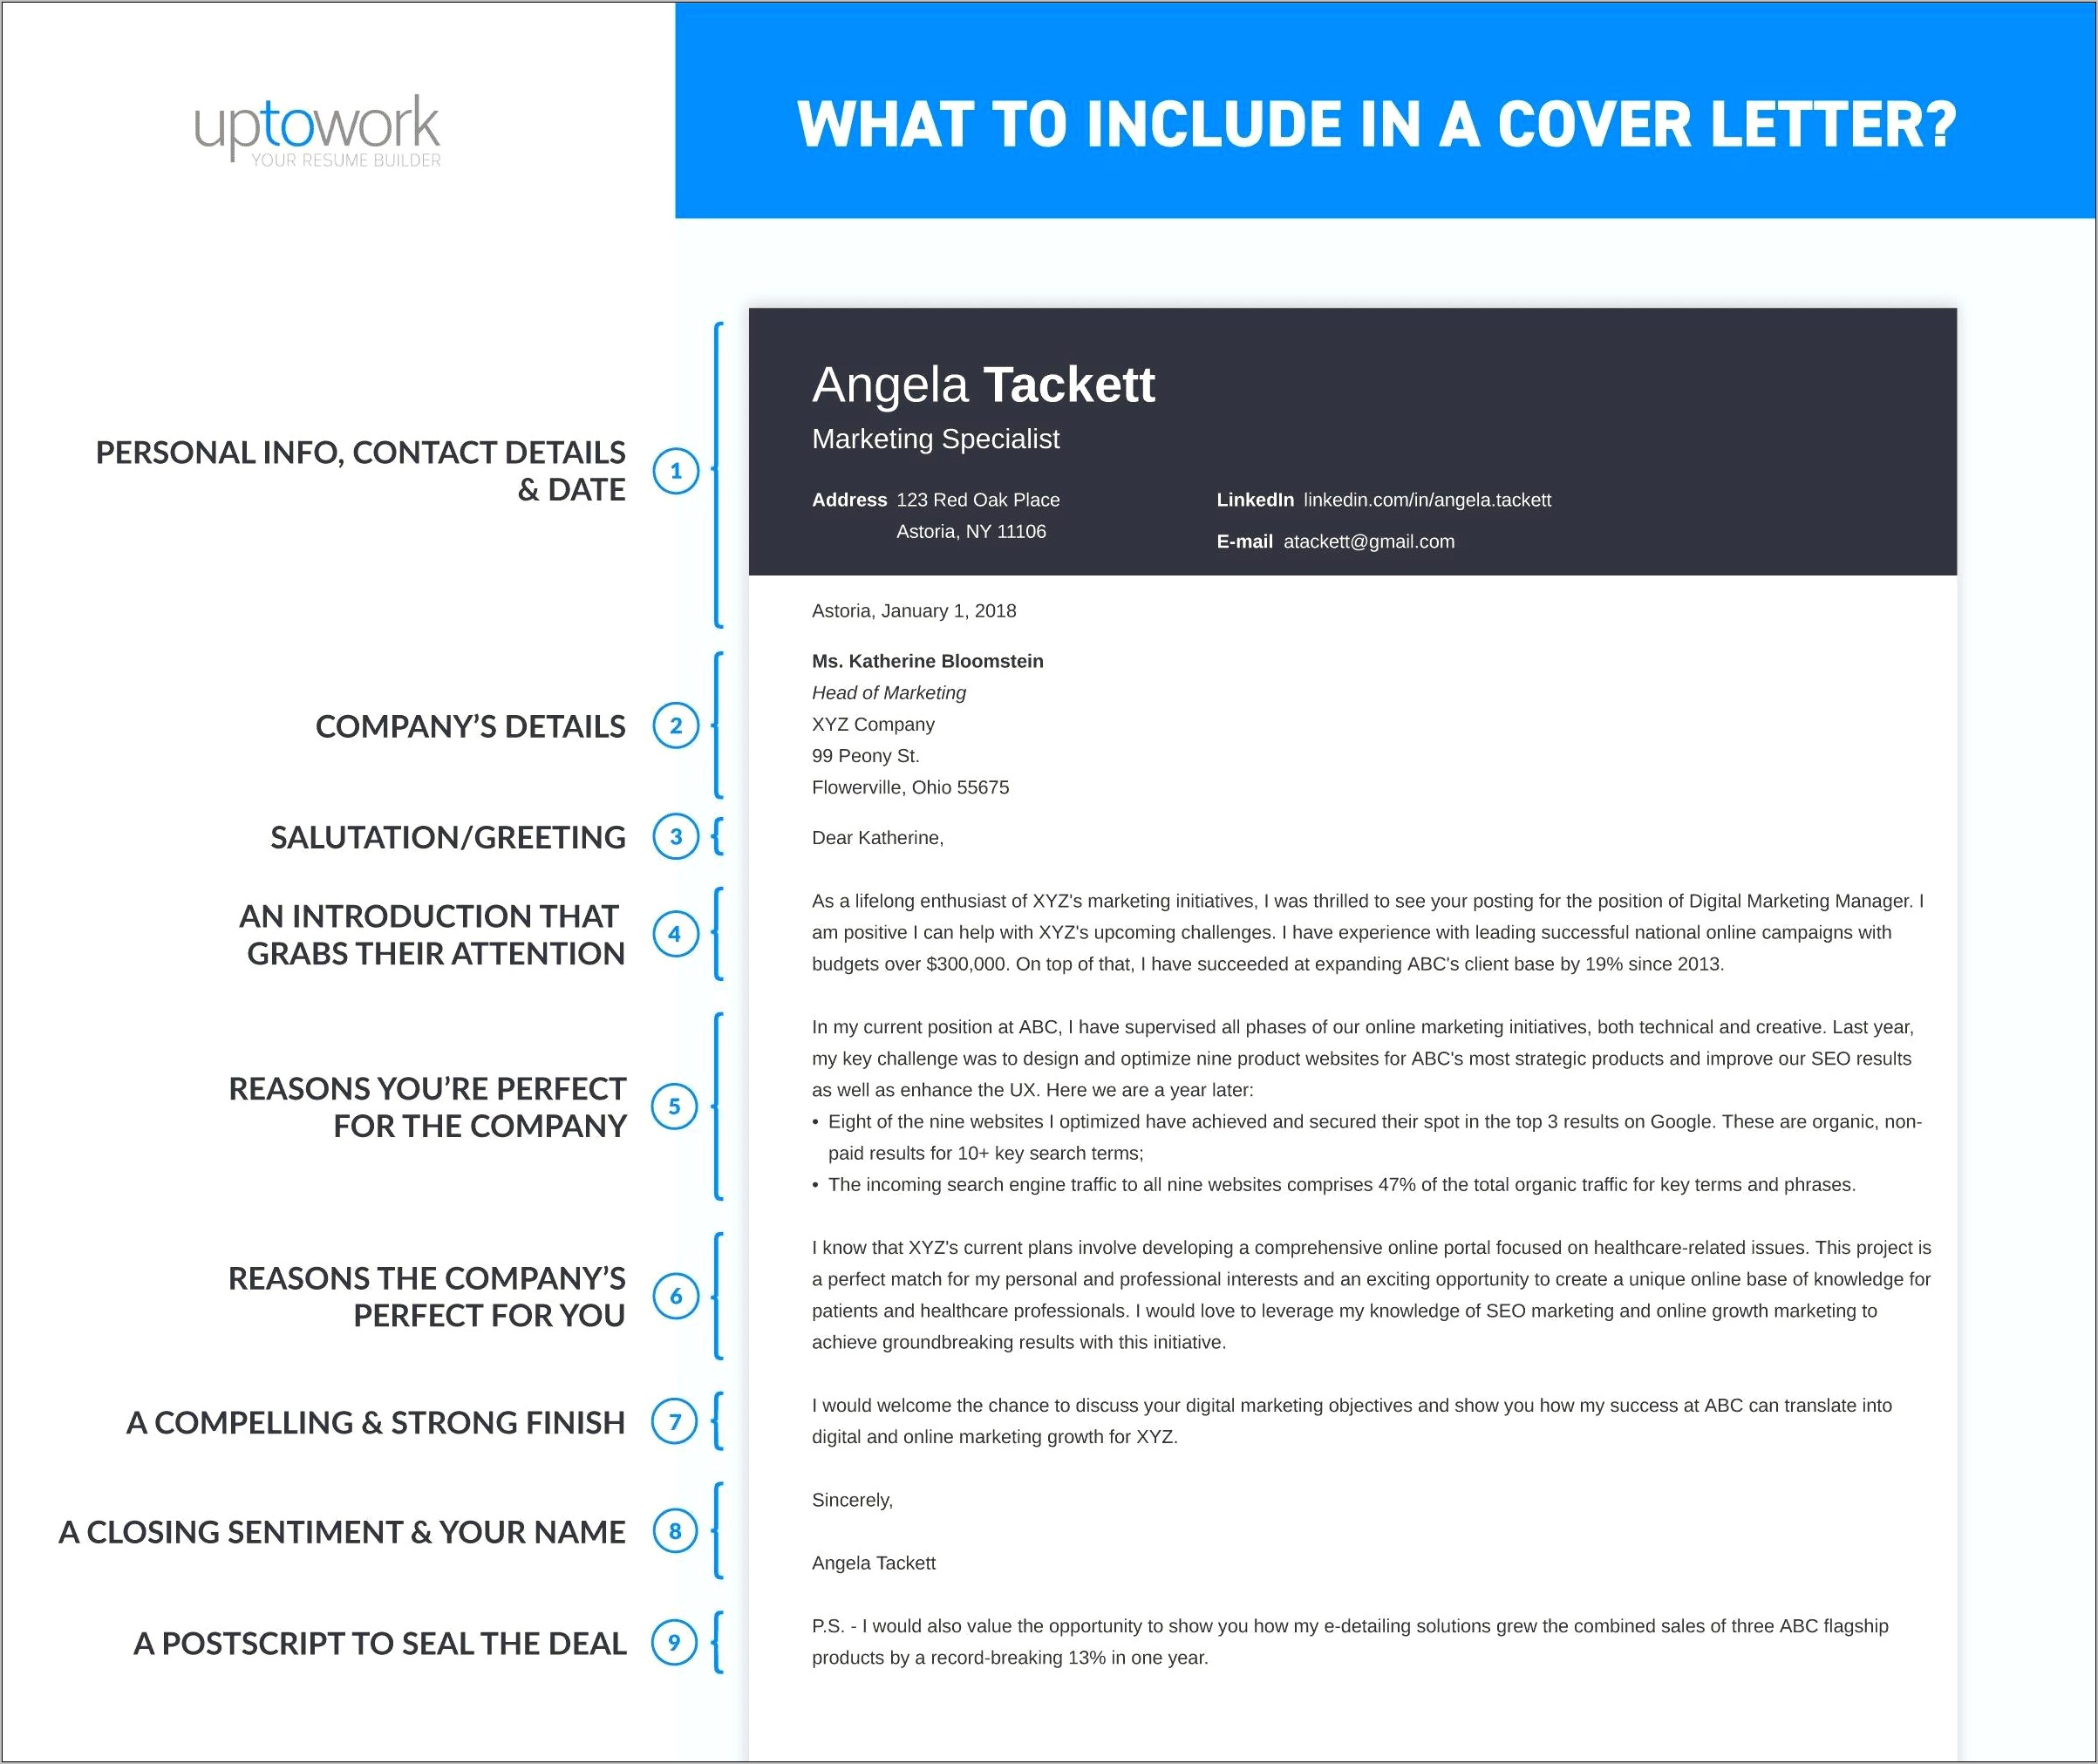 Include A Cover Letter With My Resume